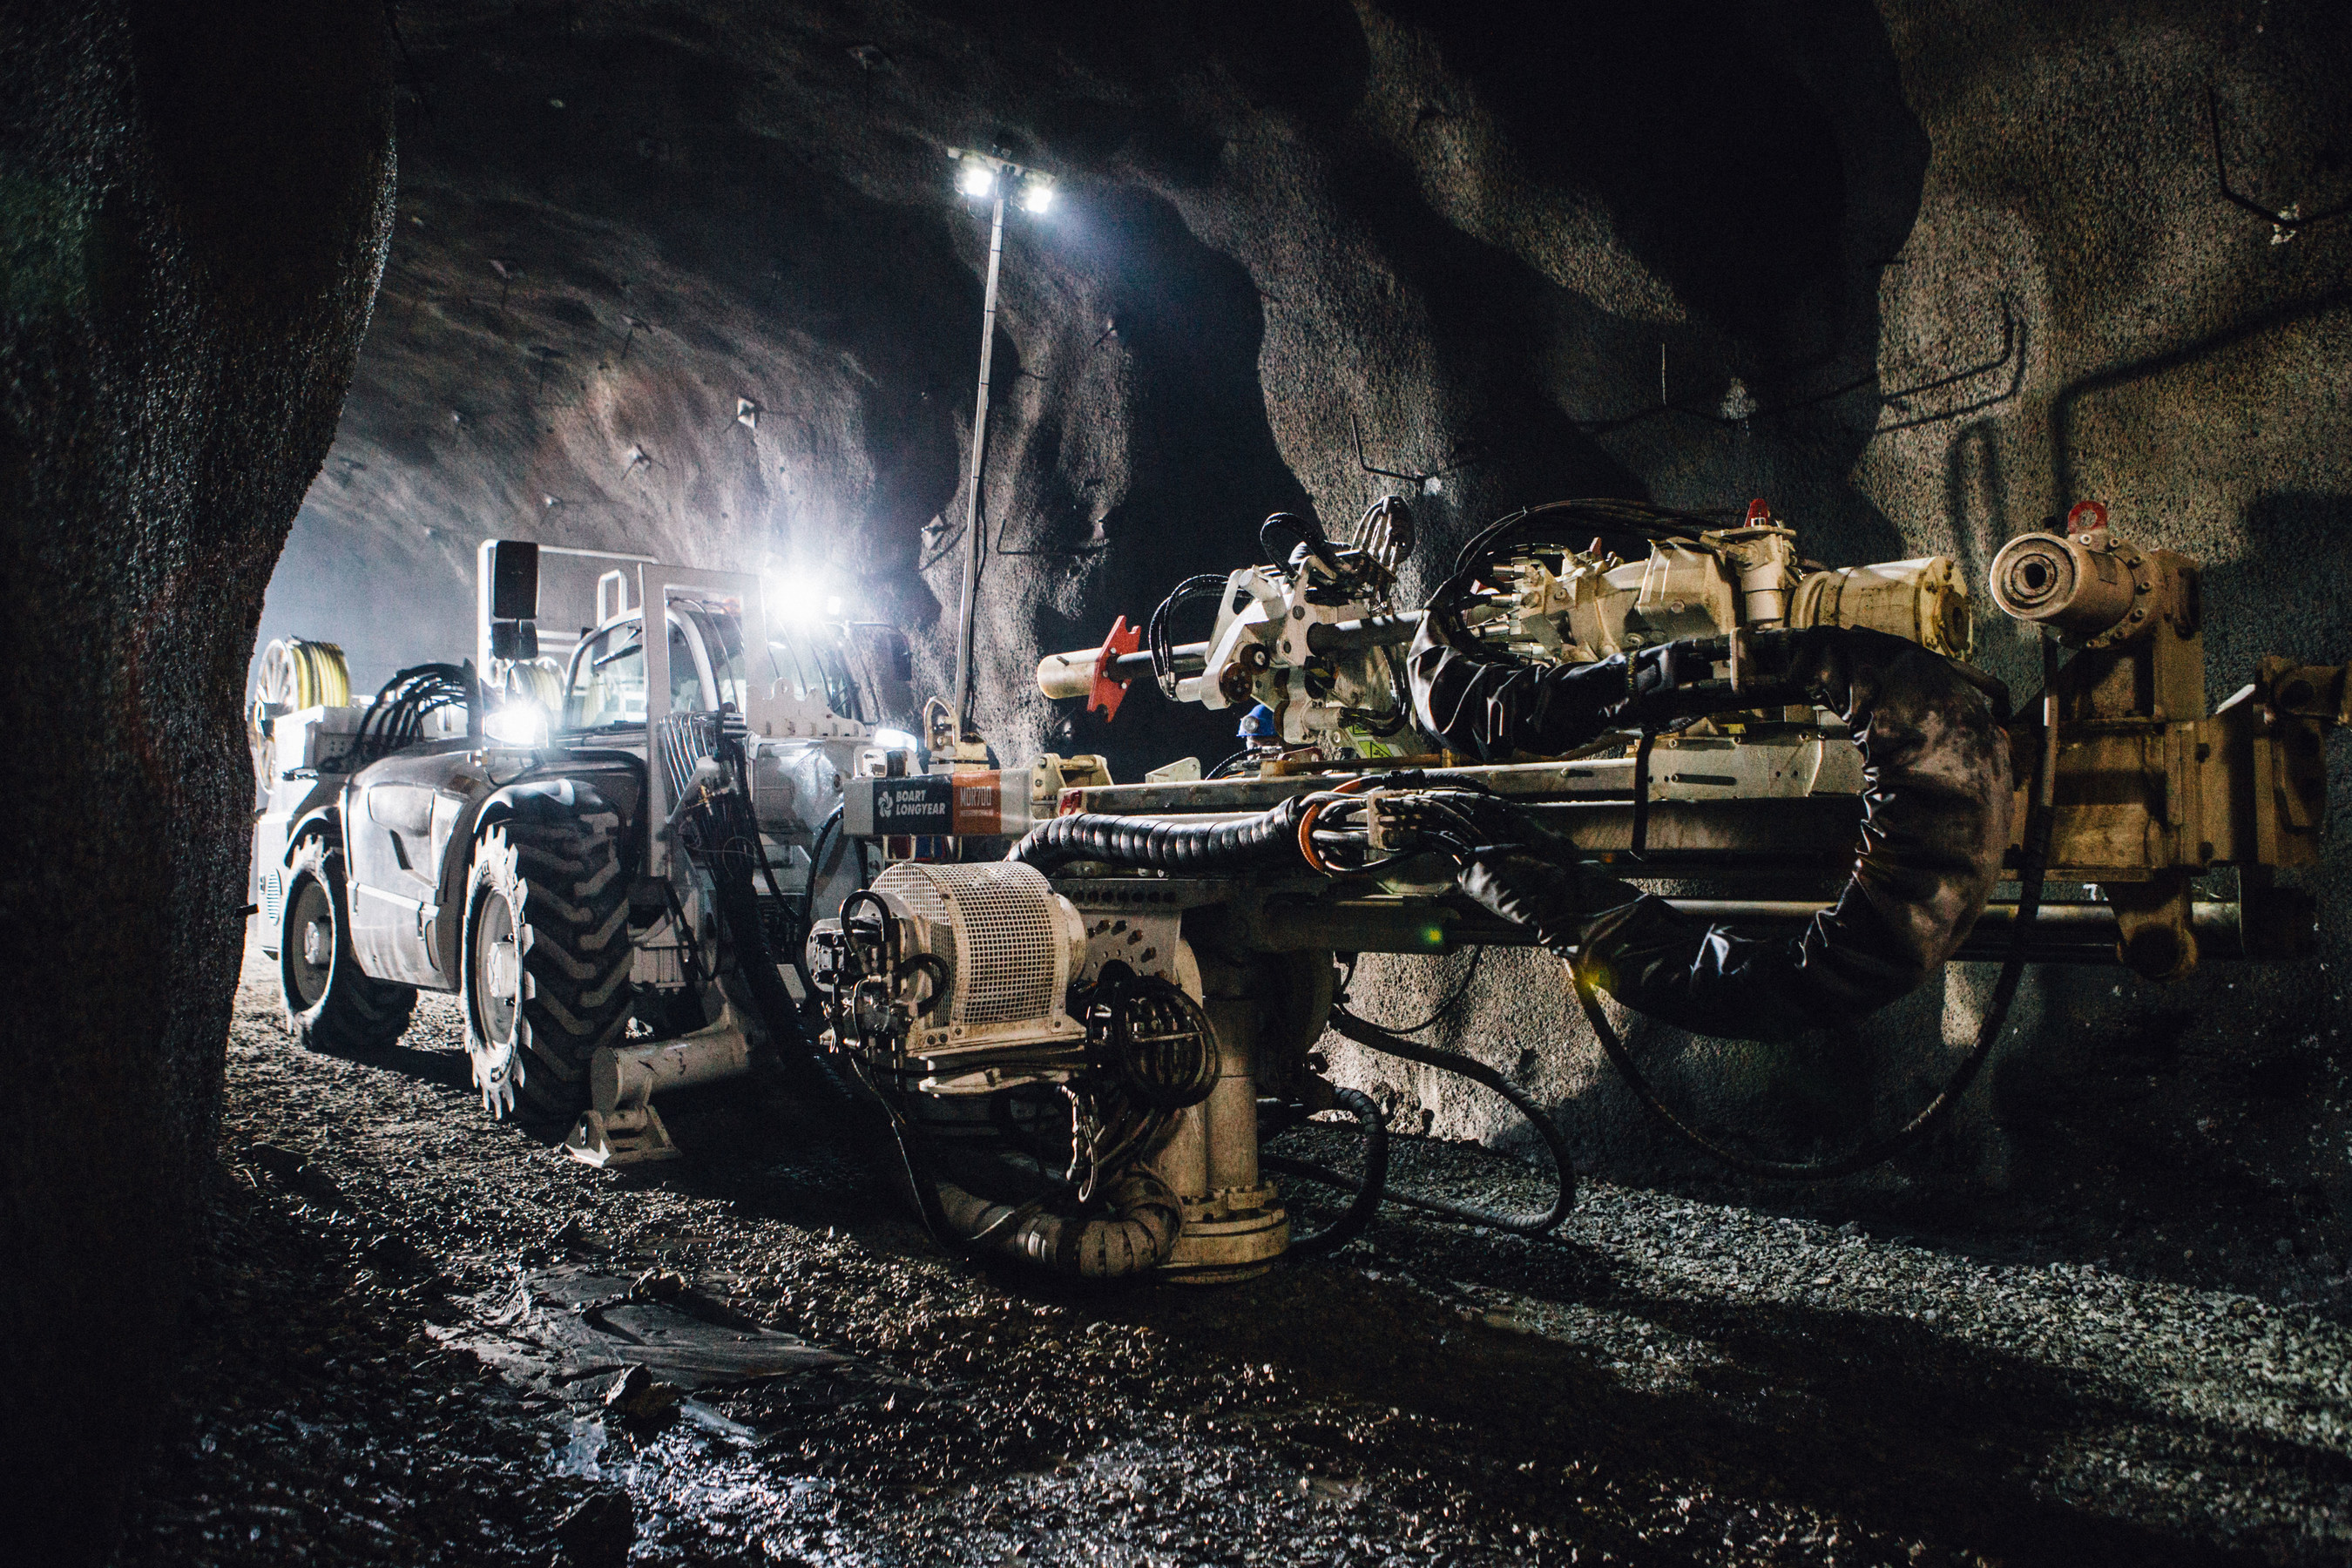 The Boart Longyear MDR700 underground coring rig offers wide drilling angles, quick set up, easy operation and maintenance, advanced mobility and engineered safety controls.